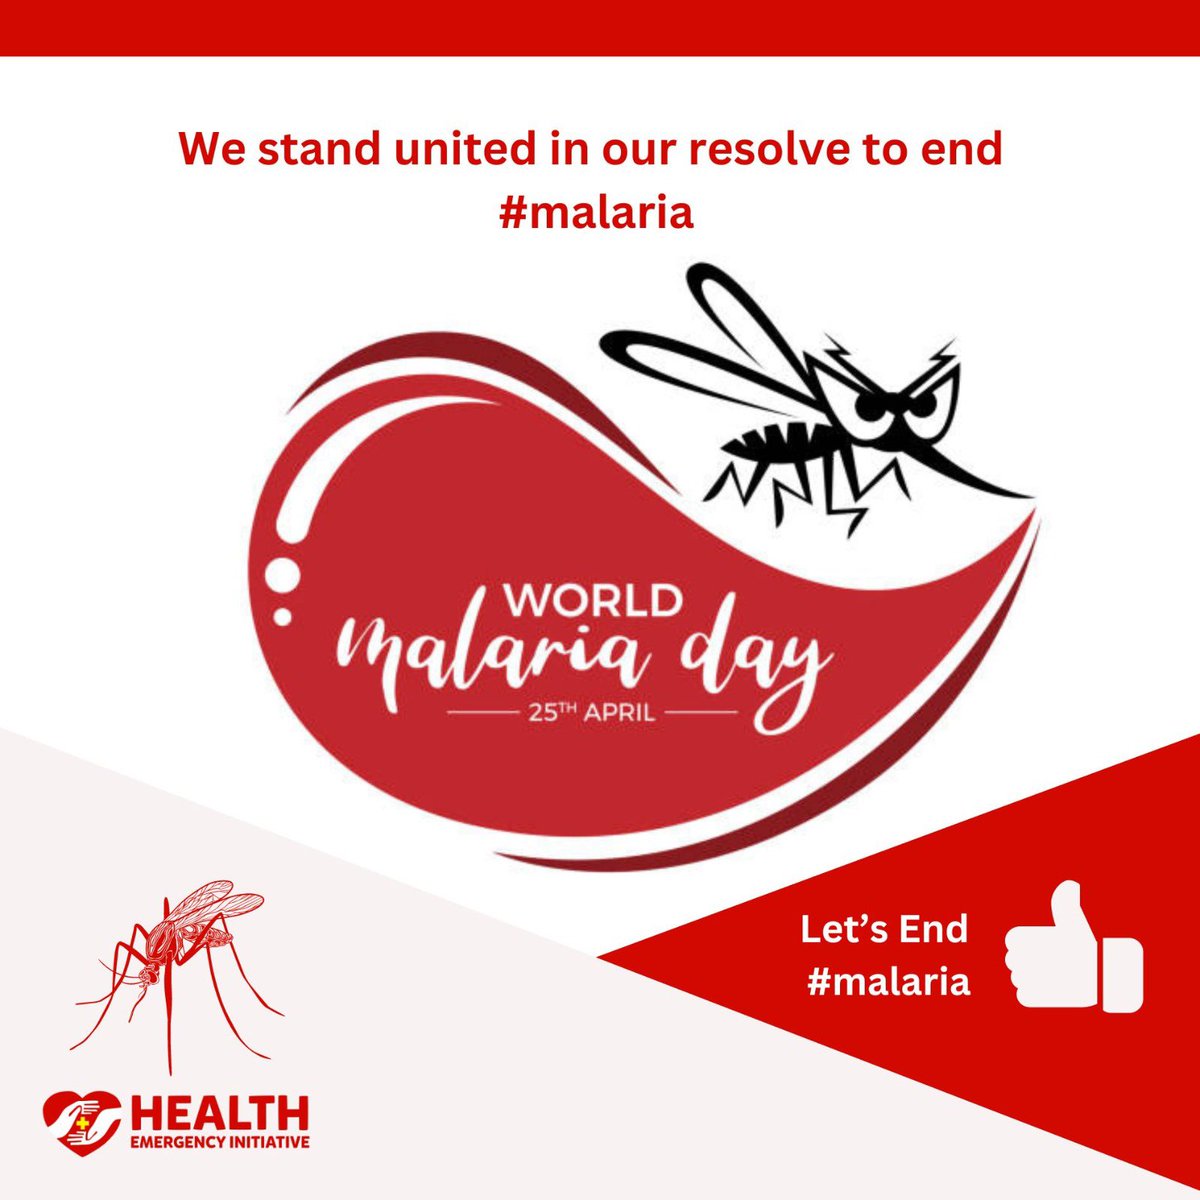 Let's unite on World Malaria Day to fight this preventable disease. Join Health Emergency in saving lives. Together, we can end malaria. Visit: hei.org.ng/get-involved/ #thatnoneshoulddie #ngofund #helpout #liveandnotdie #hei #charity #EndMalaria #WorldMalariaDay